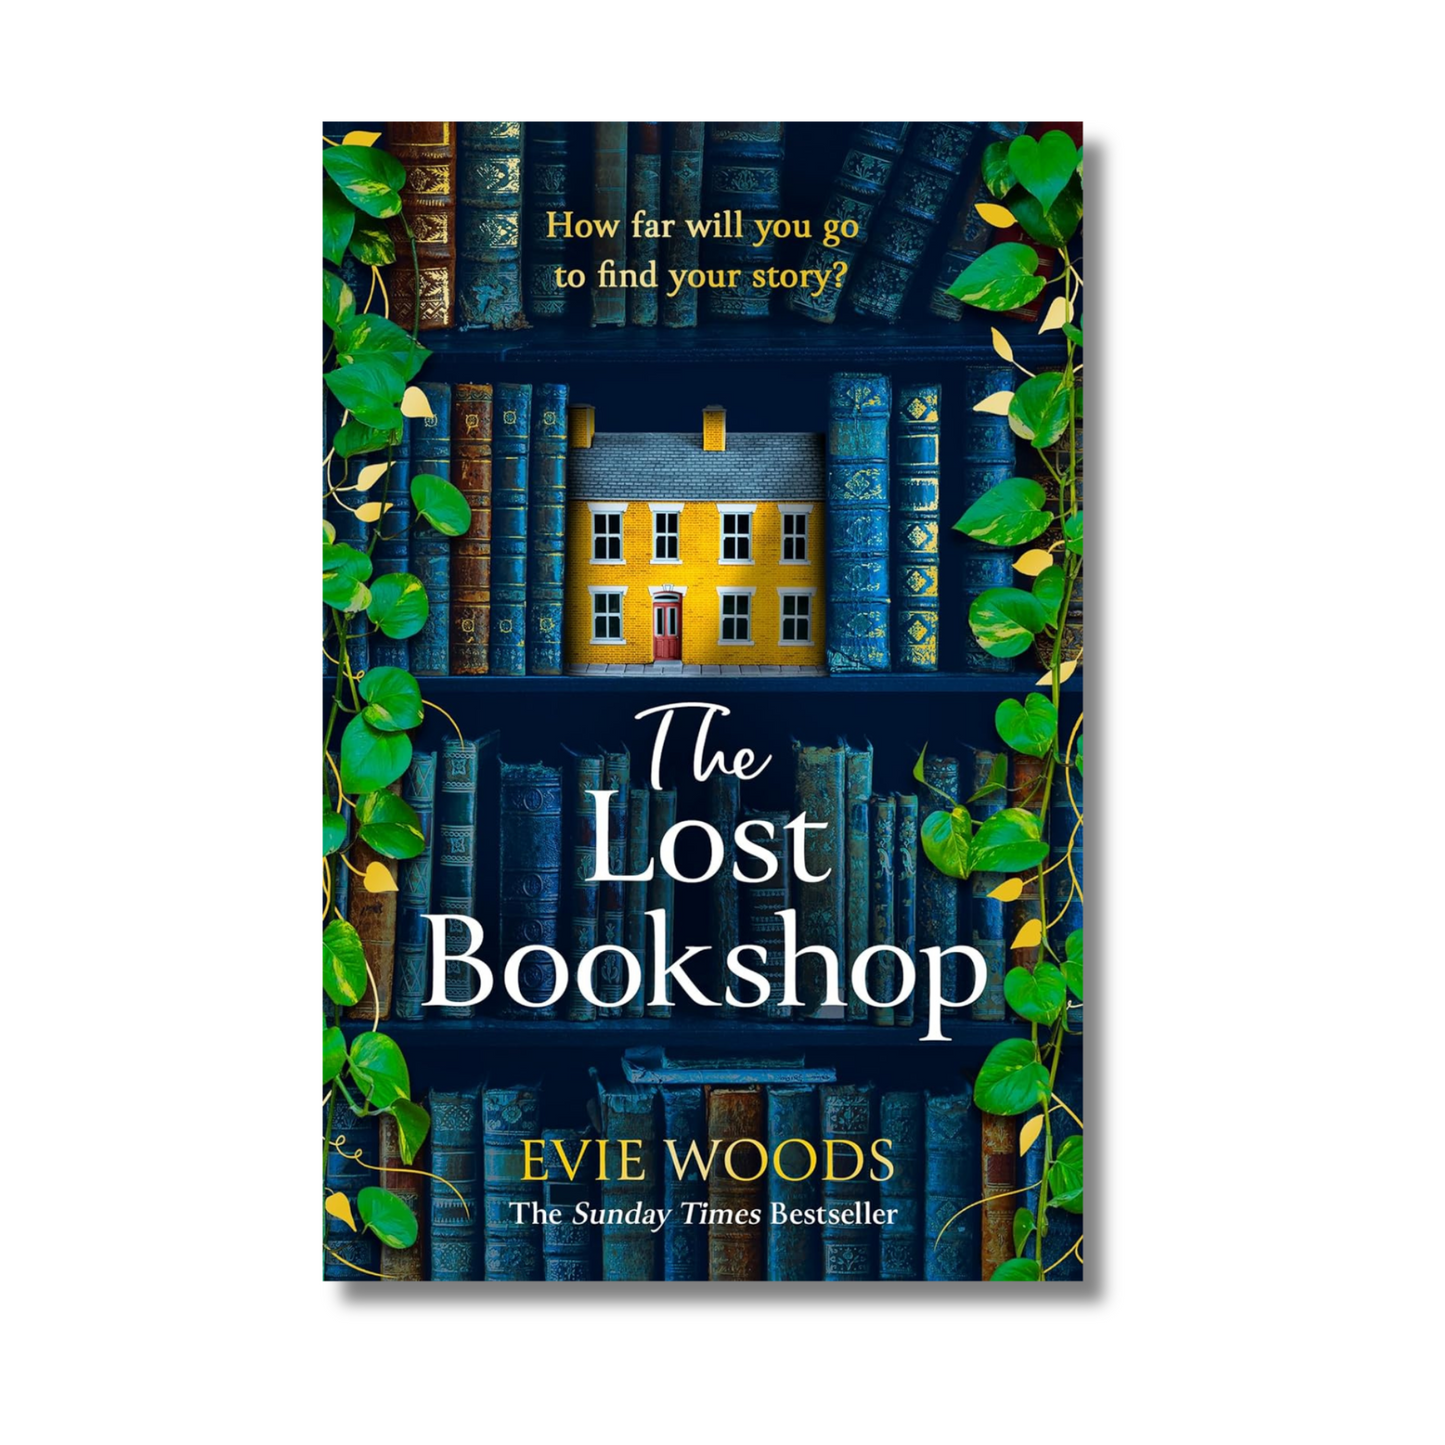 The Lost Bookshop by Evie Woods (Paperback)